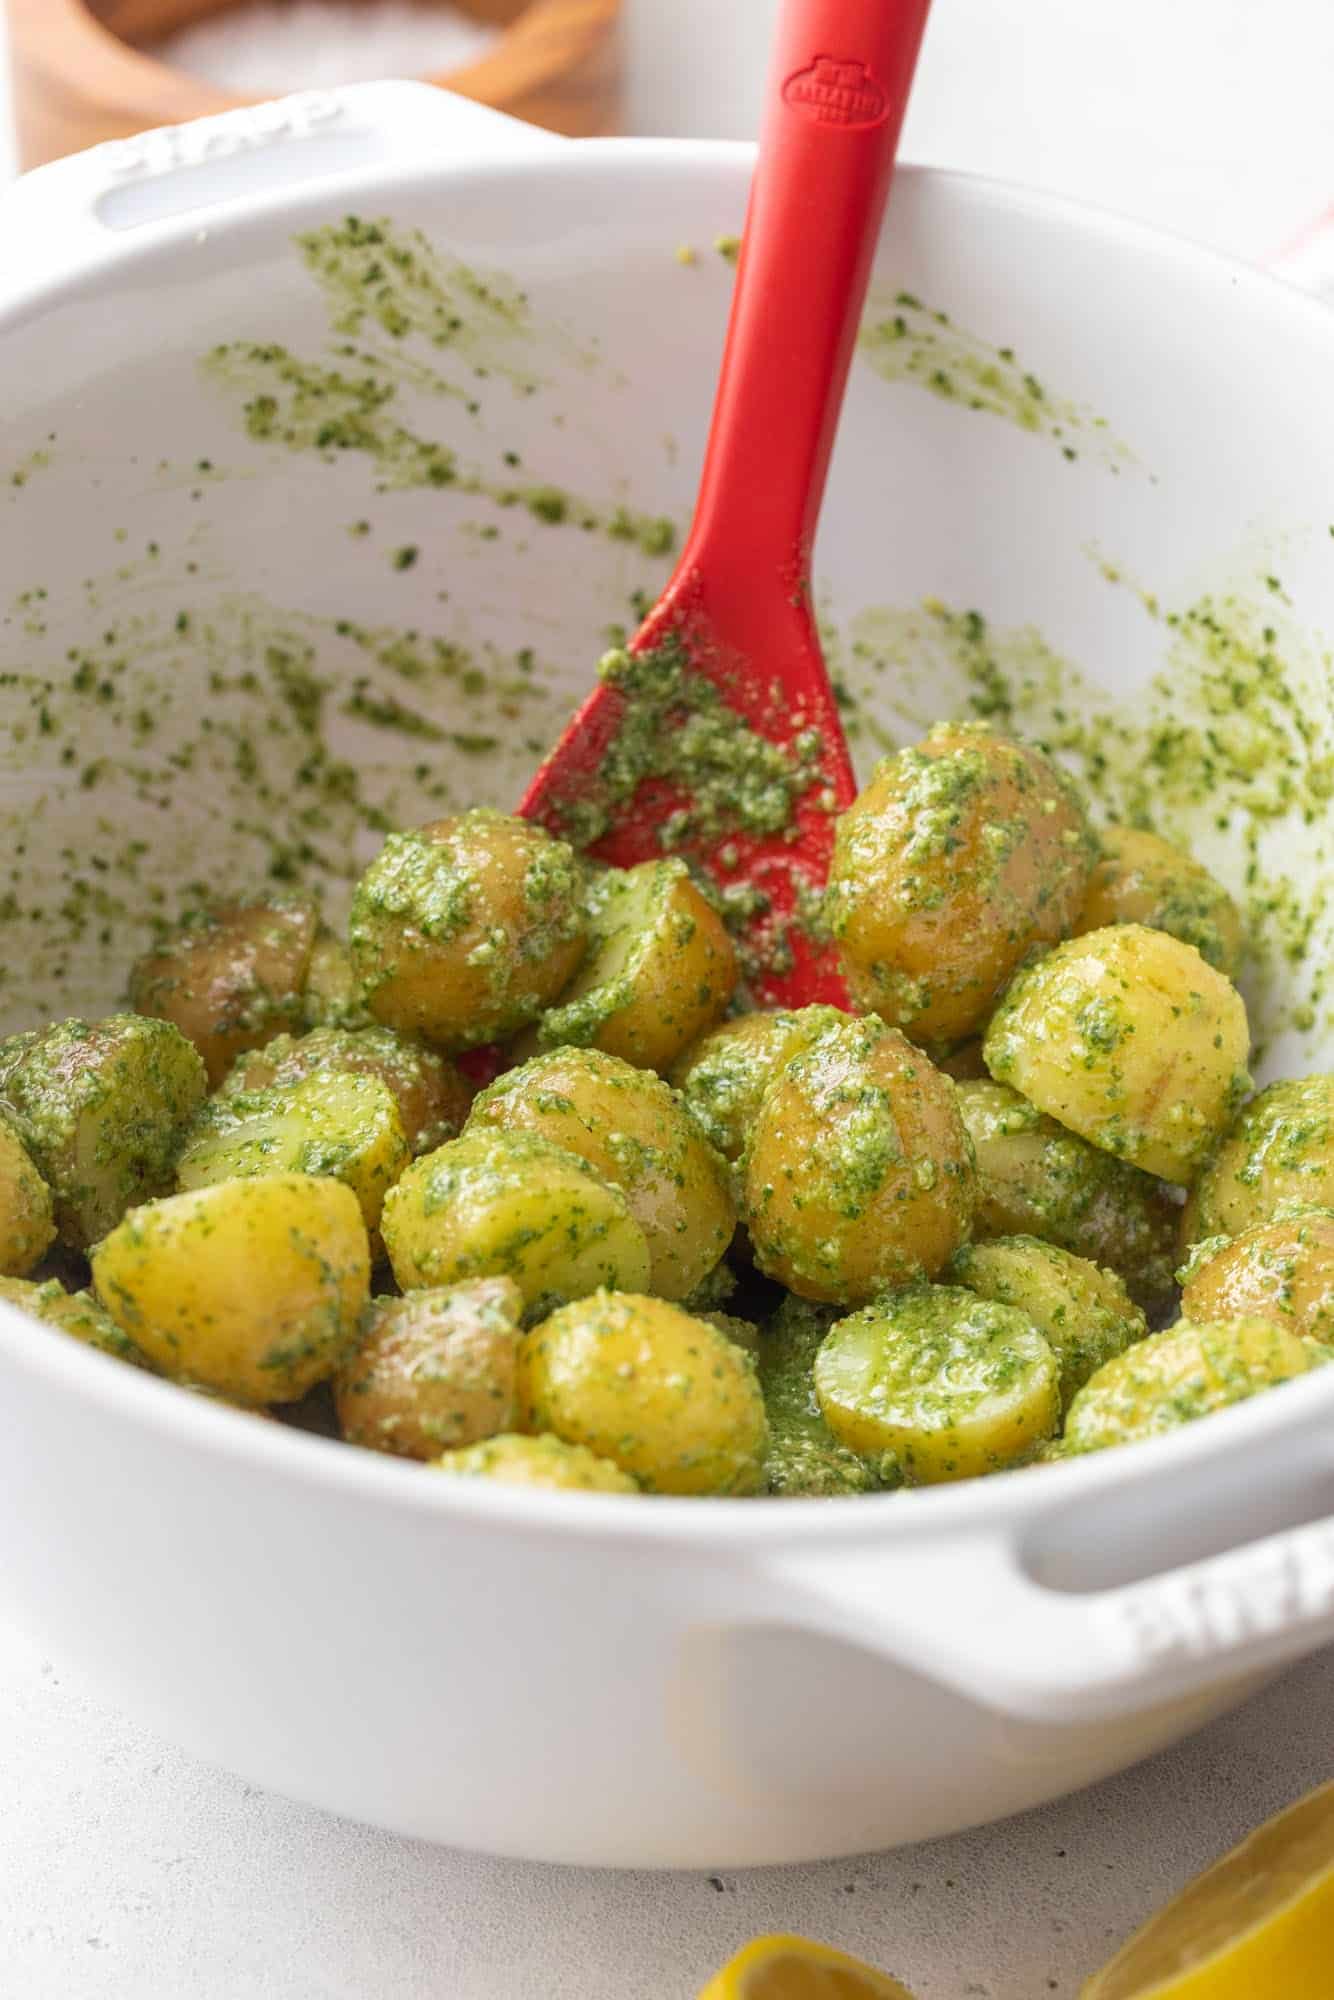 Baby potatoes dressed in basil pesto dressing in a white bowl